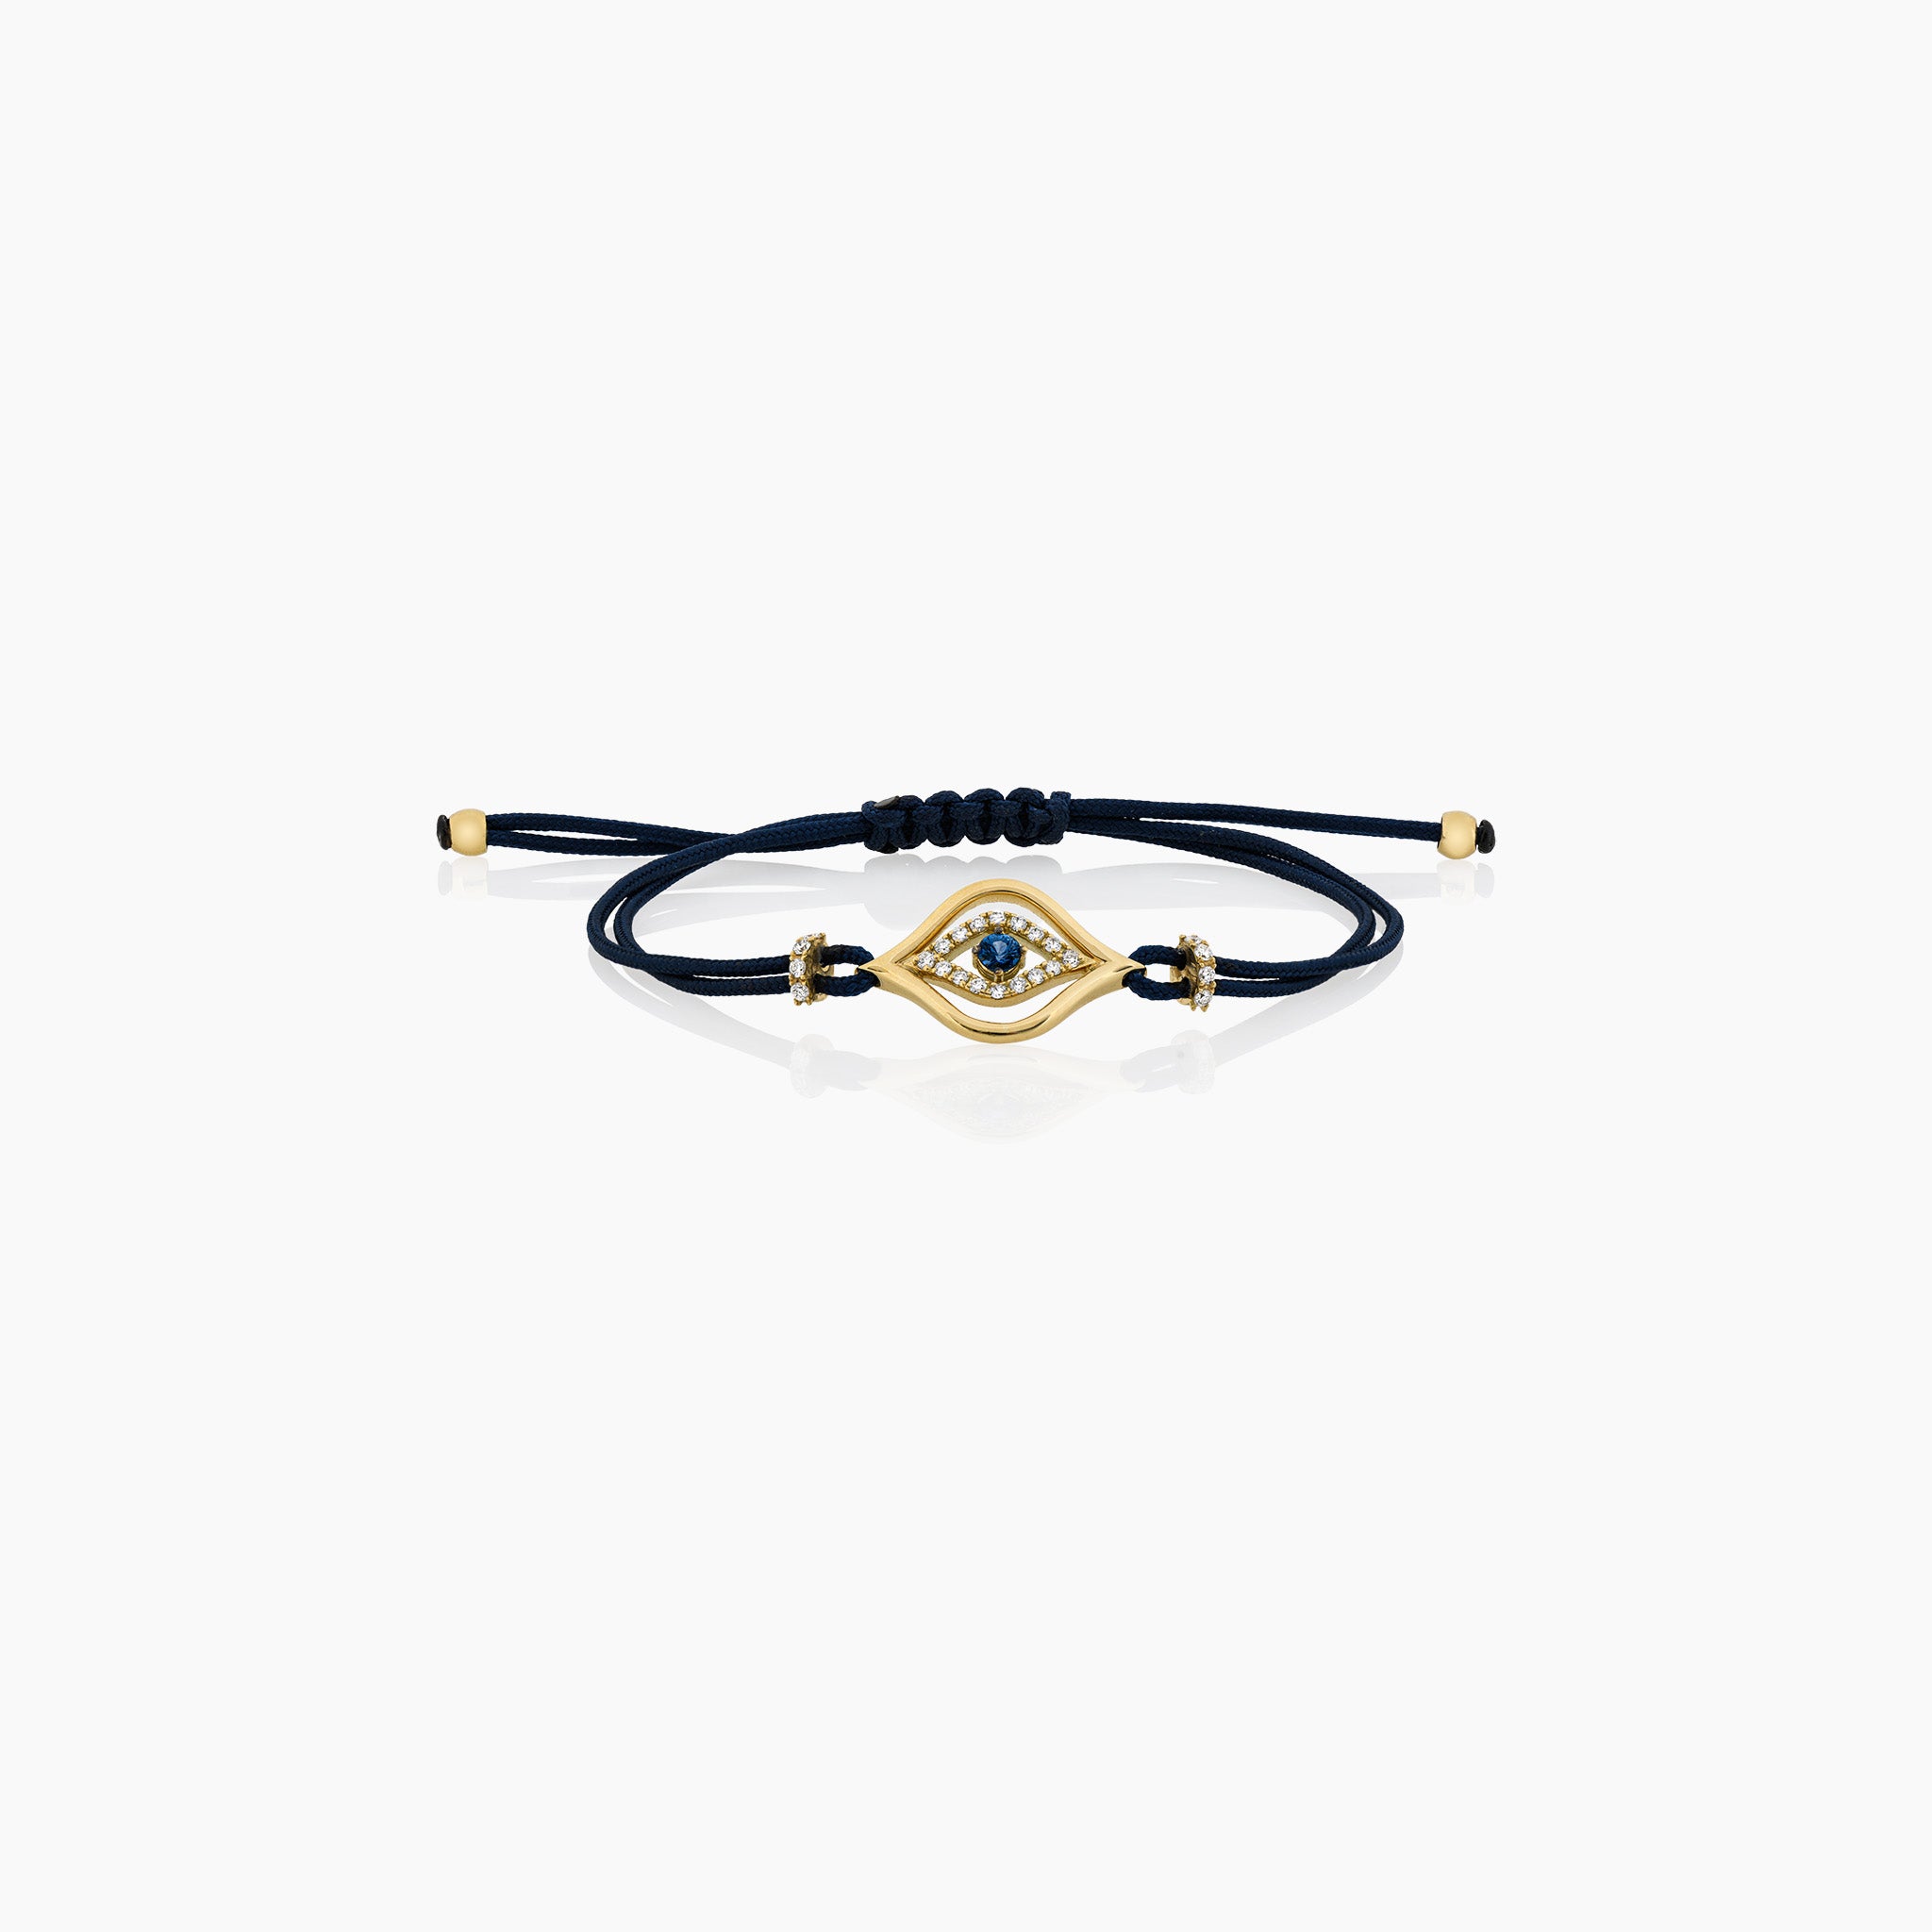 A stylish evil eye cord bracelet featuring a central sapphire surrounded by diamonds, set on a cord, presented against an off-white background. 